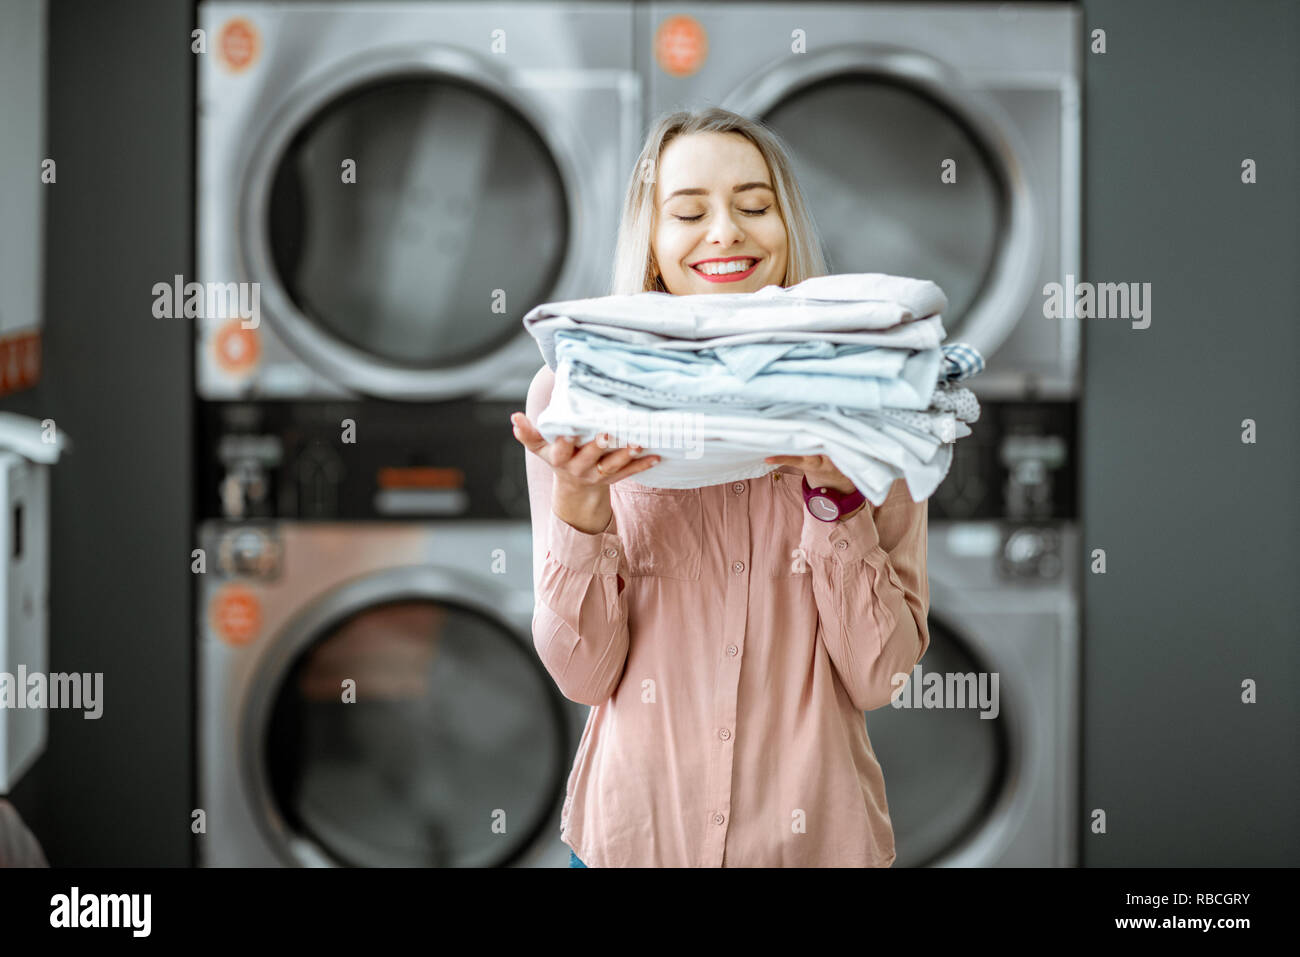 Pile Of Clothes High Resolution Stock Photography and Images - Alamy